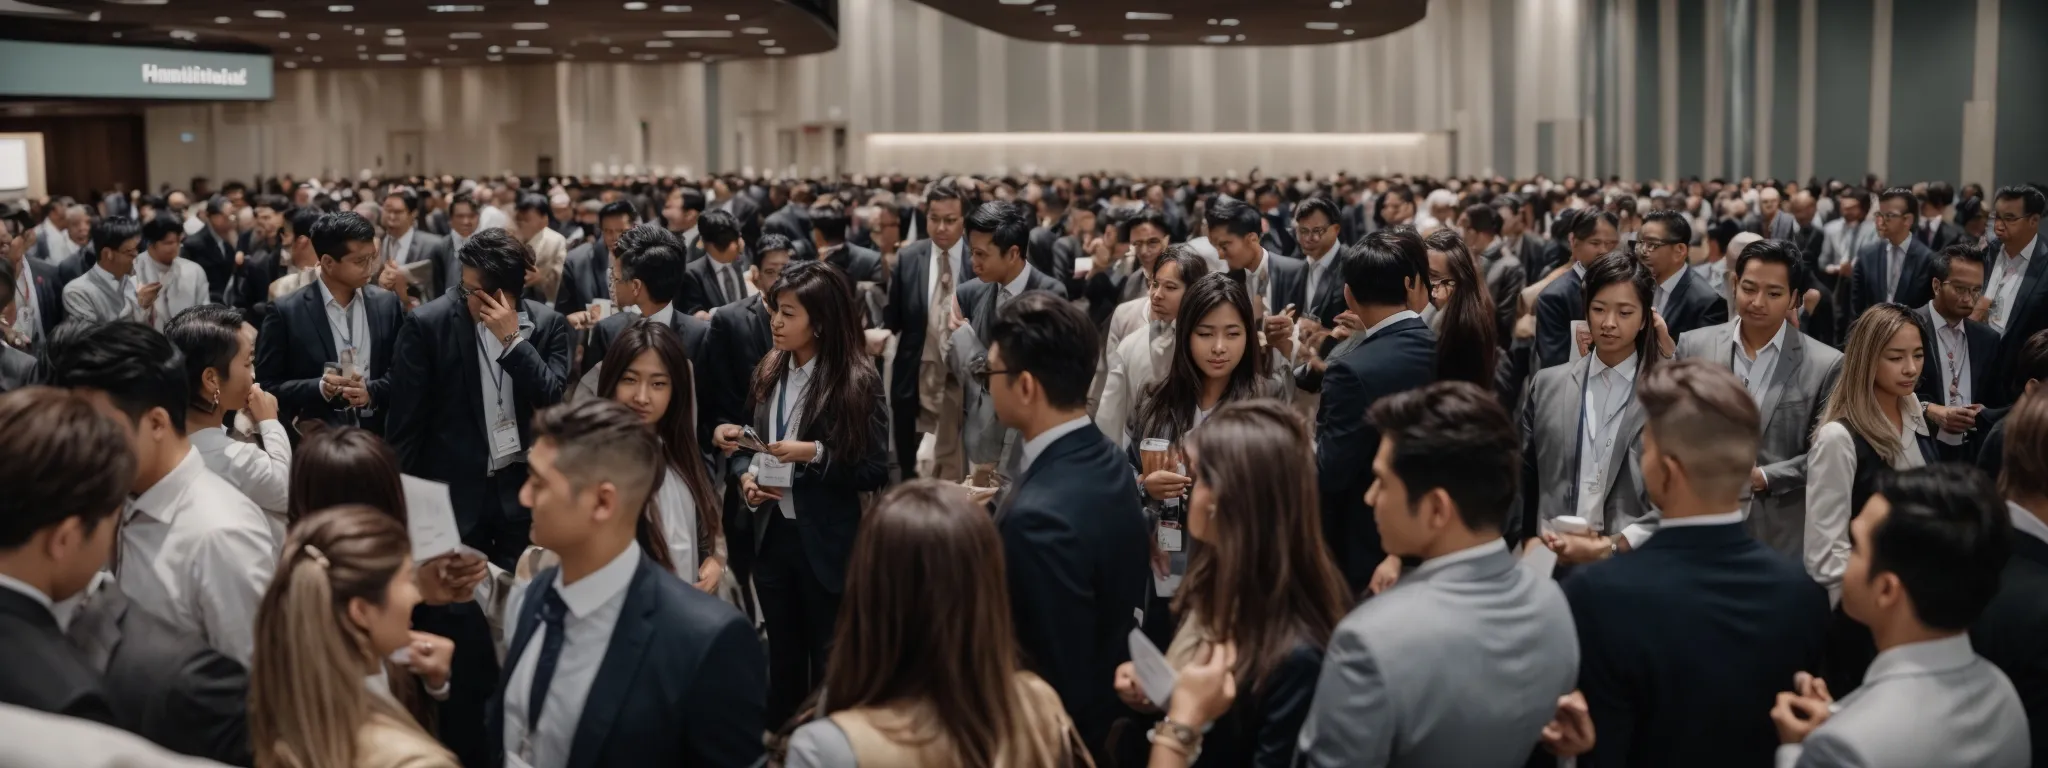 a bustling real estate conference with professionals mingling and exchanging business cards.